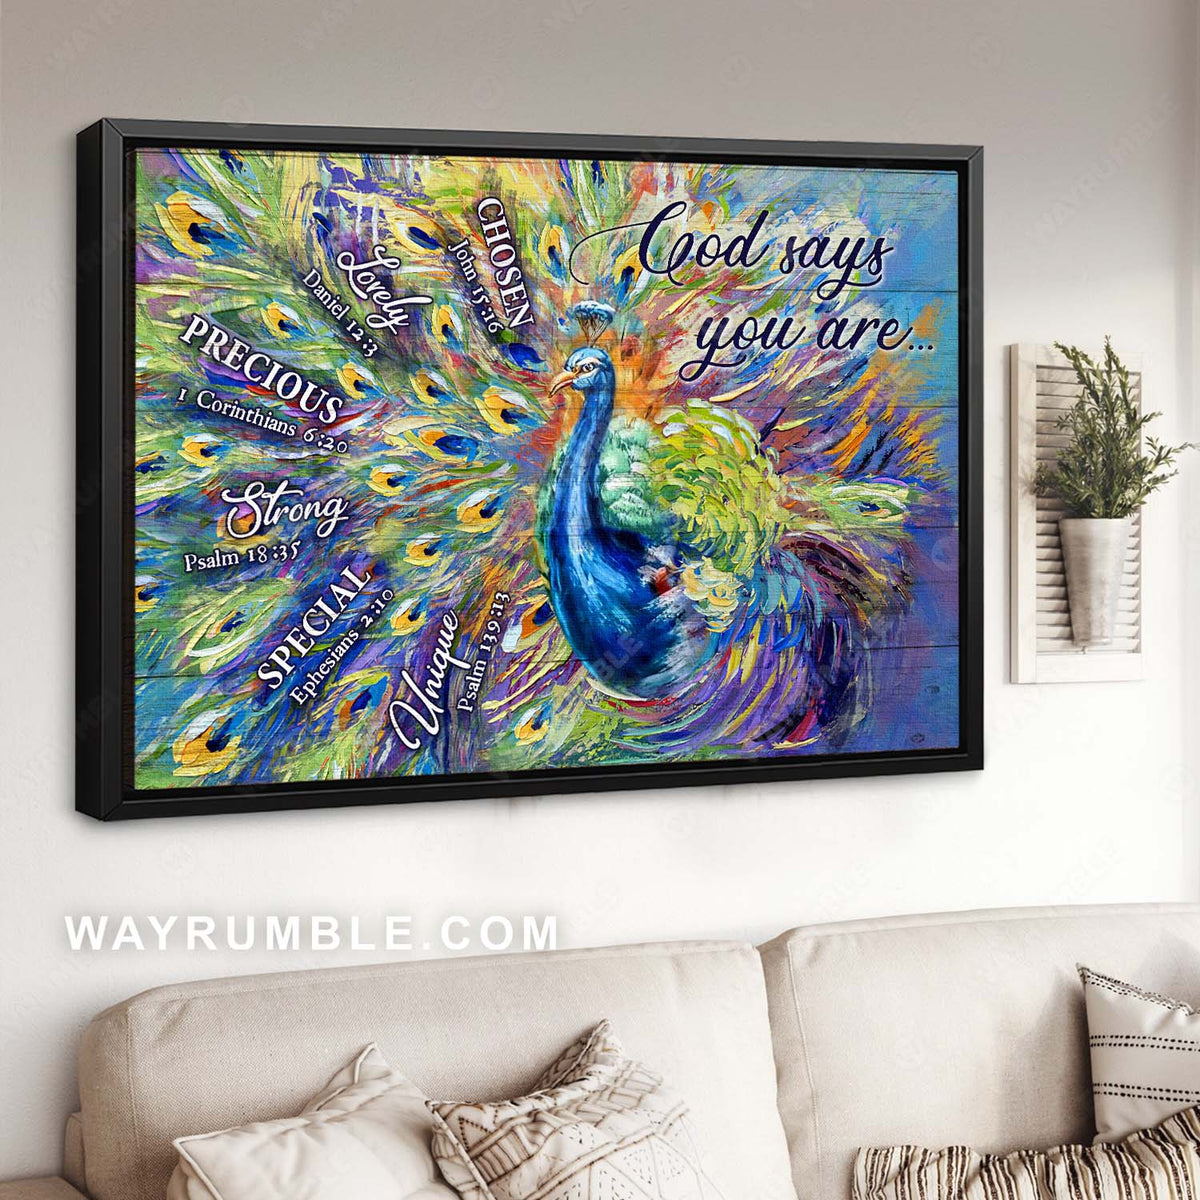 Peacock by Chris Lord Photo Peacock Photo Peacock Decor Wall Art Decor Peacock Wall Art Bird Prints Bird Pictures Wall Decor Feather Prints Wall Art B